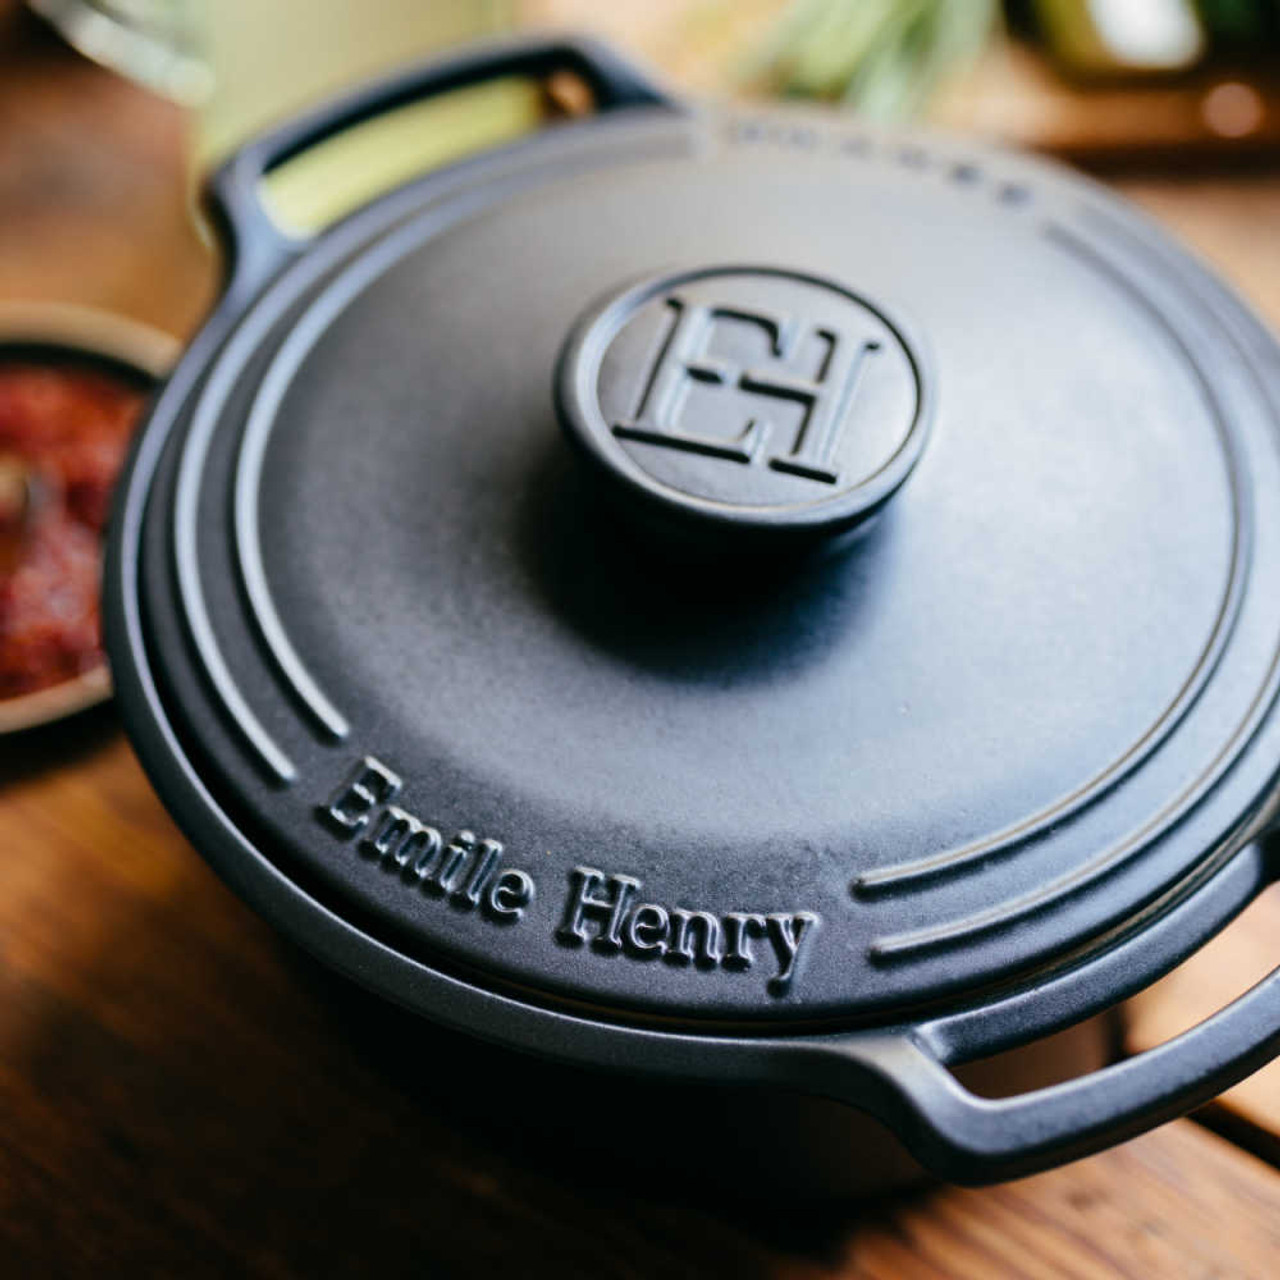 Eight Reasons For You To Use Emile Henry Cookware